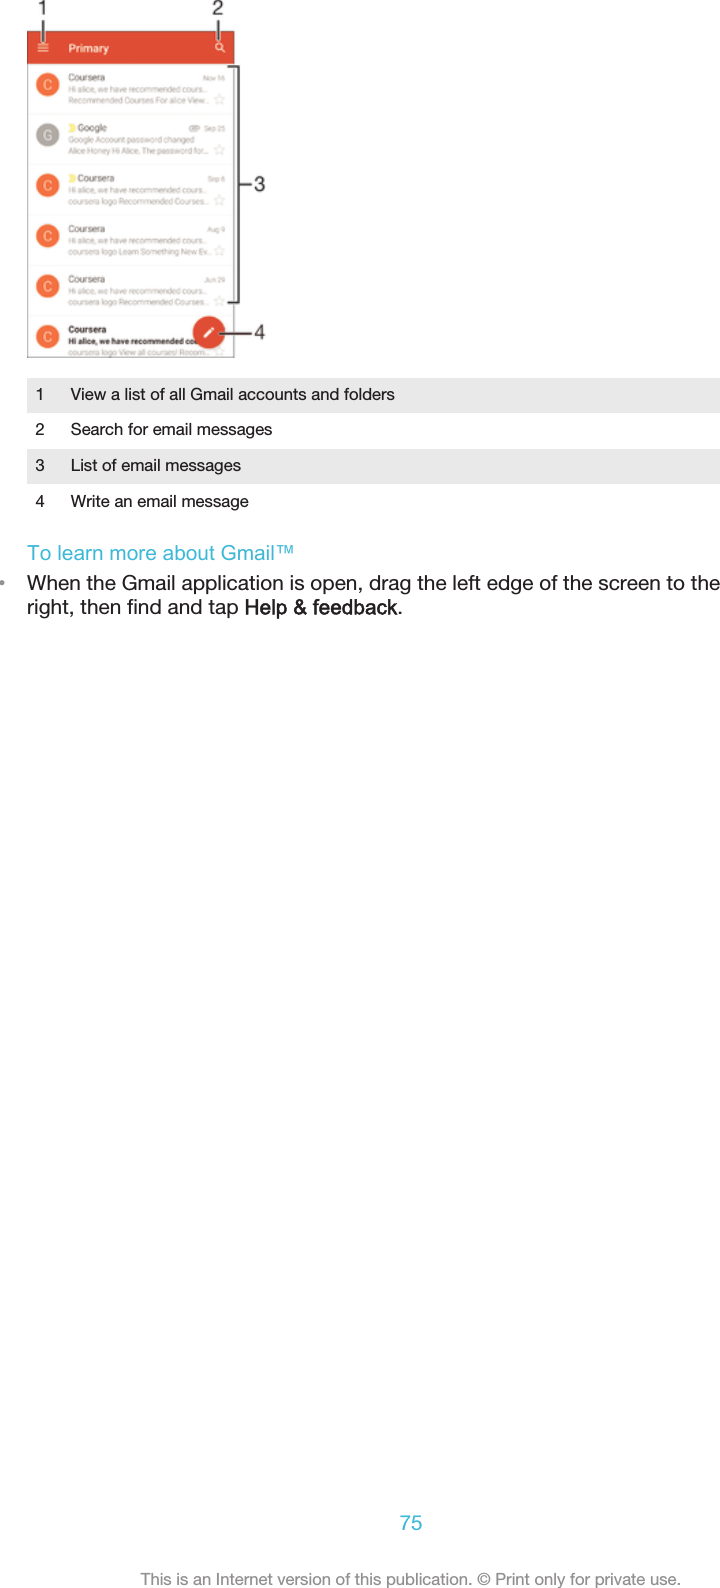 1 View a list of all Gmail accounts and folders2 Search for email messages3 List of email messages4 Write an email messageTo learn more about Gmail™•When the Gmail application is open, drag the left edge of the screen to theright, then find and tap Help &amp; feedback.75This is an Internet version of this publication. © Print only for private use.